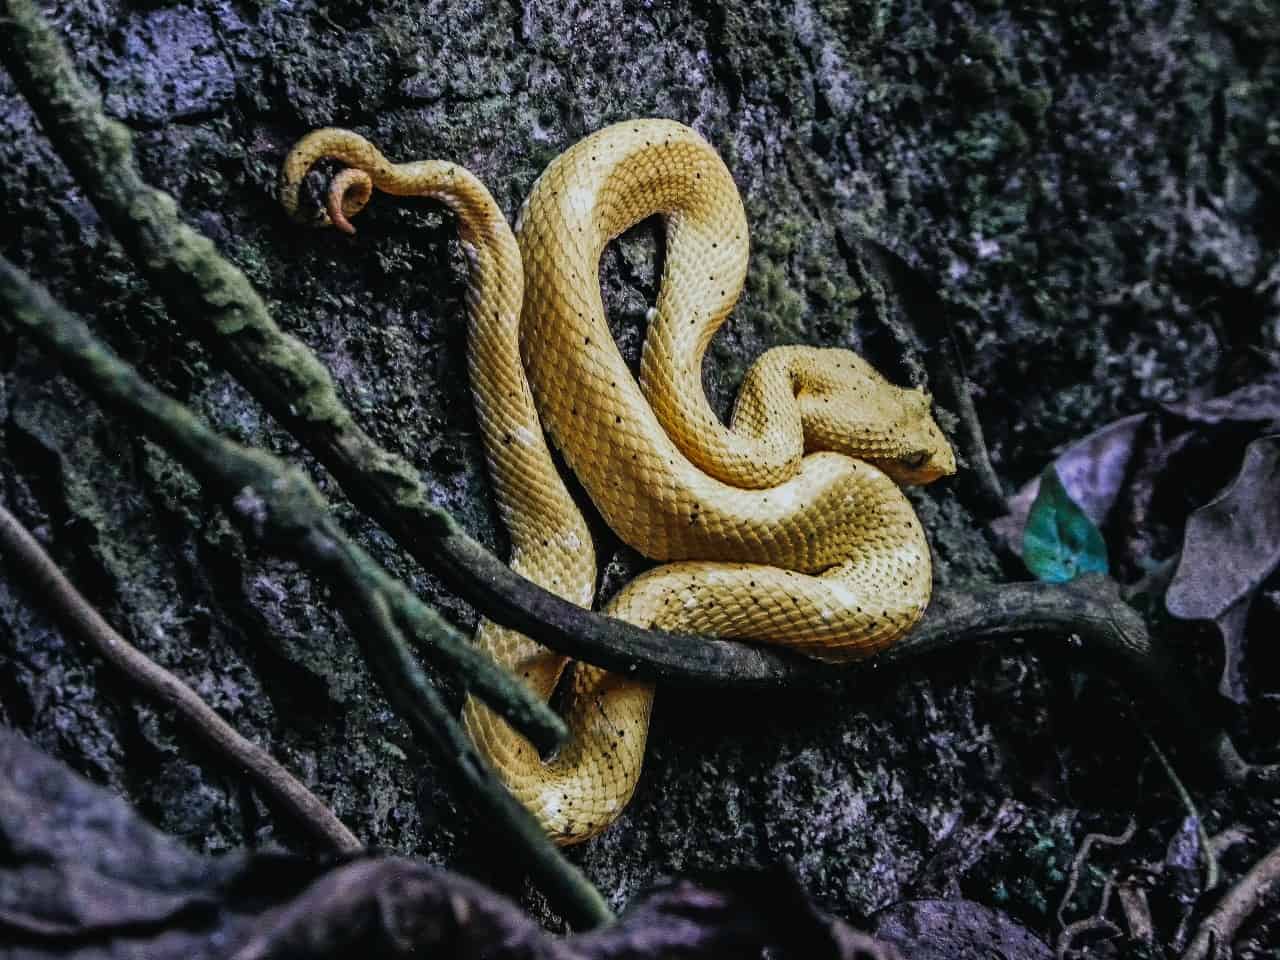 A yellow snake on vines in a tree.